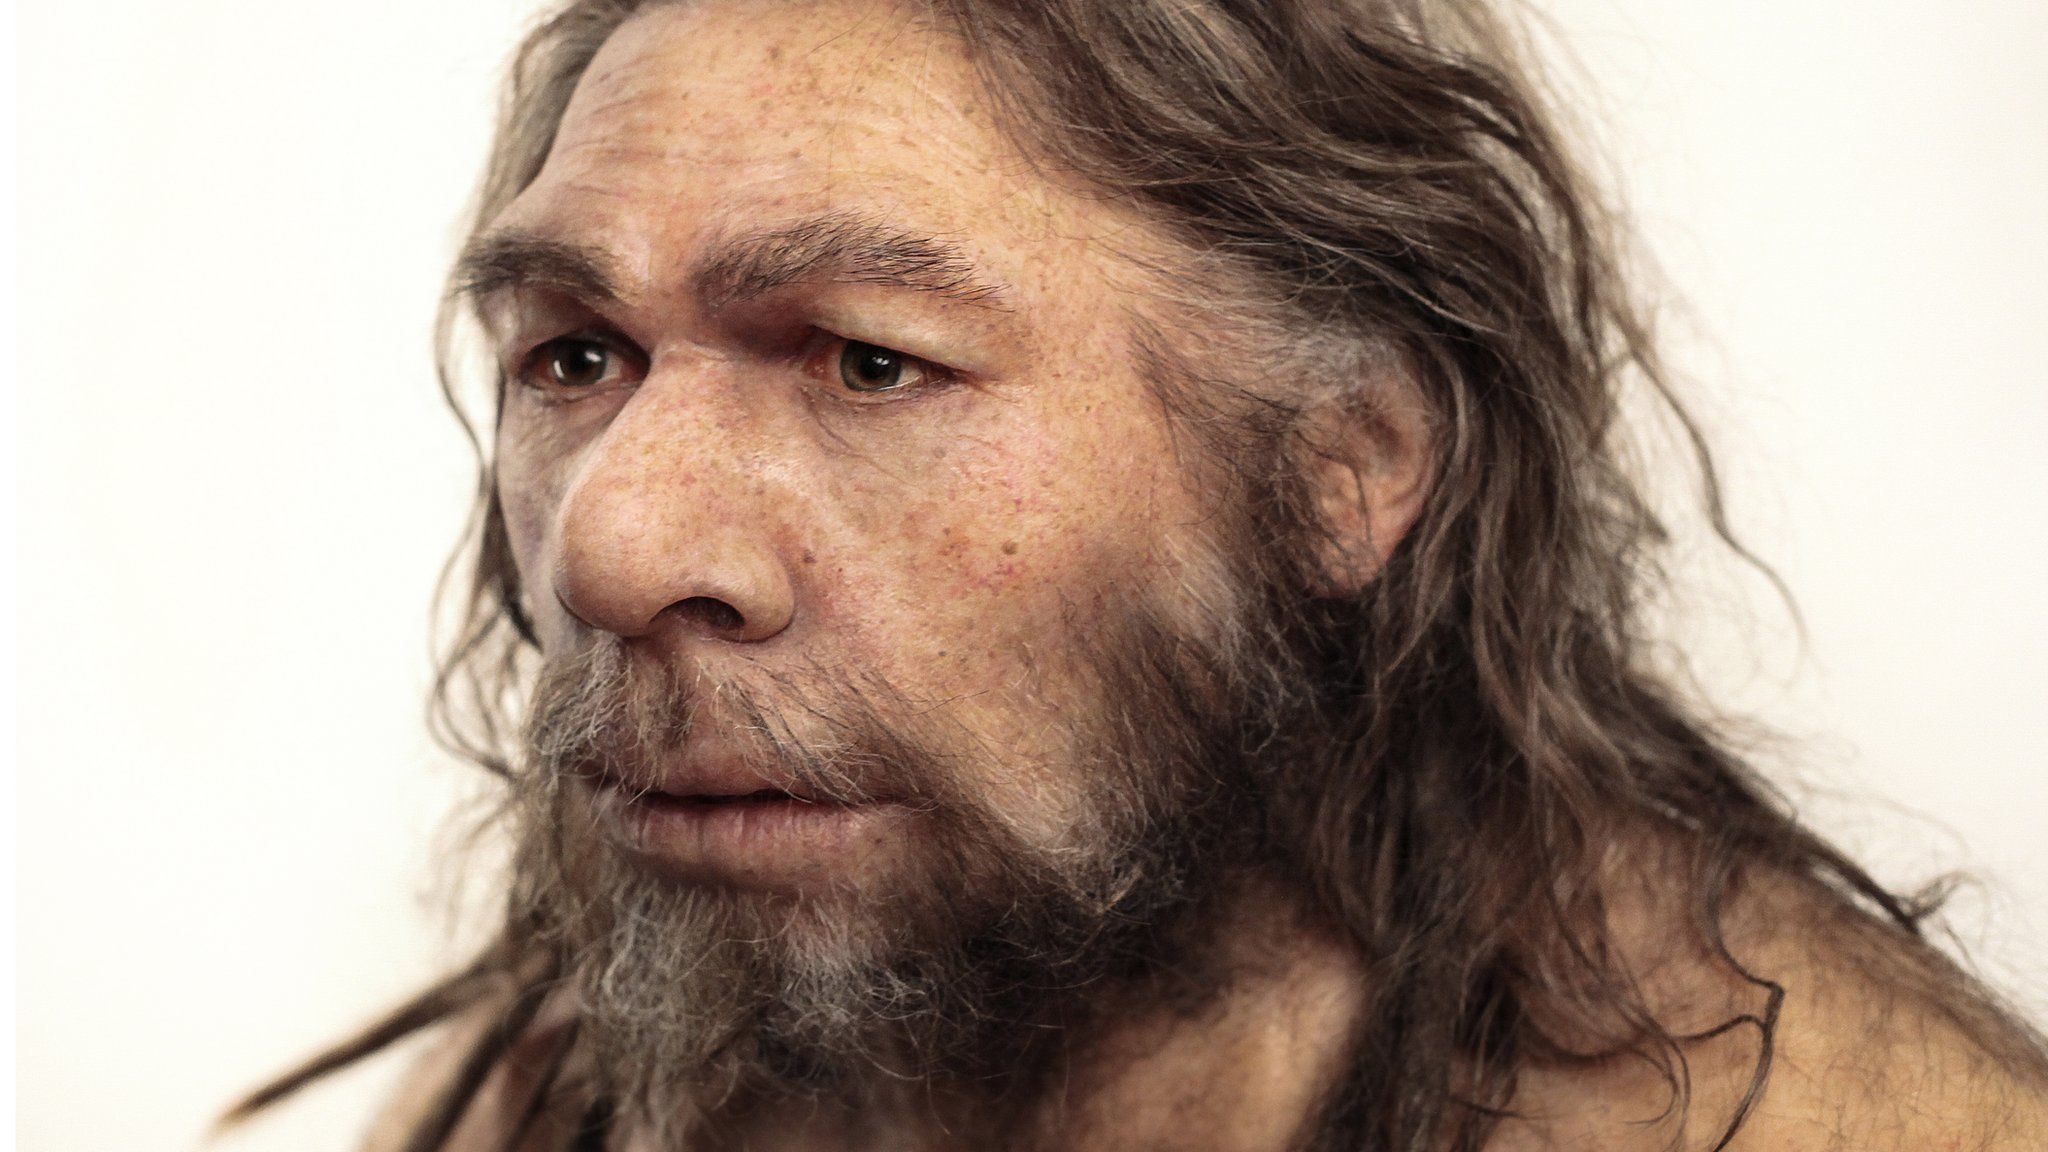 Reconstruction of a Neanderthal (Homo neanderthalensis) based on the La Chapelle-aux-Saints fossils